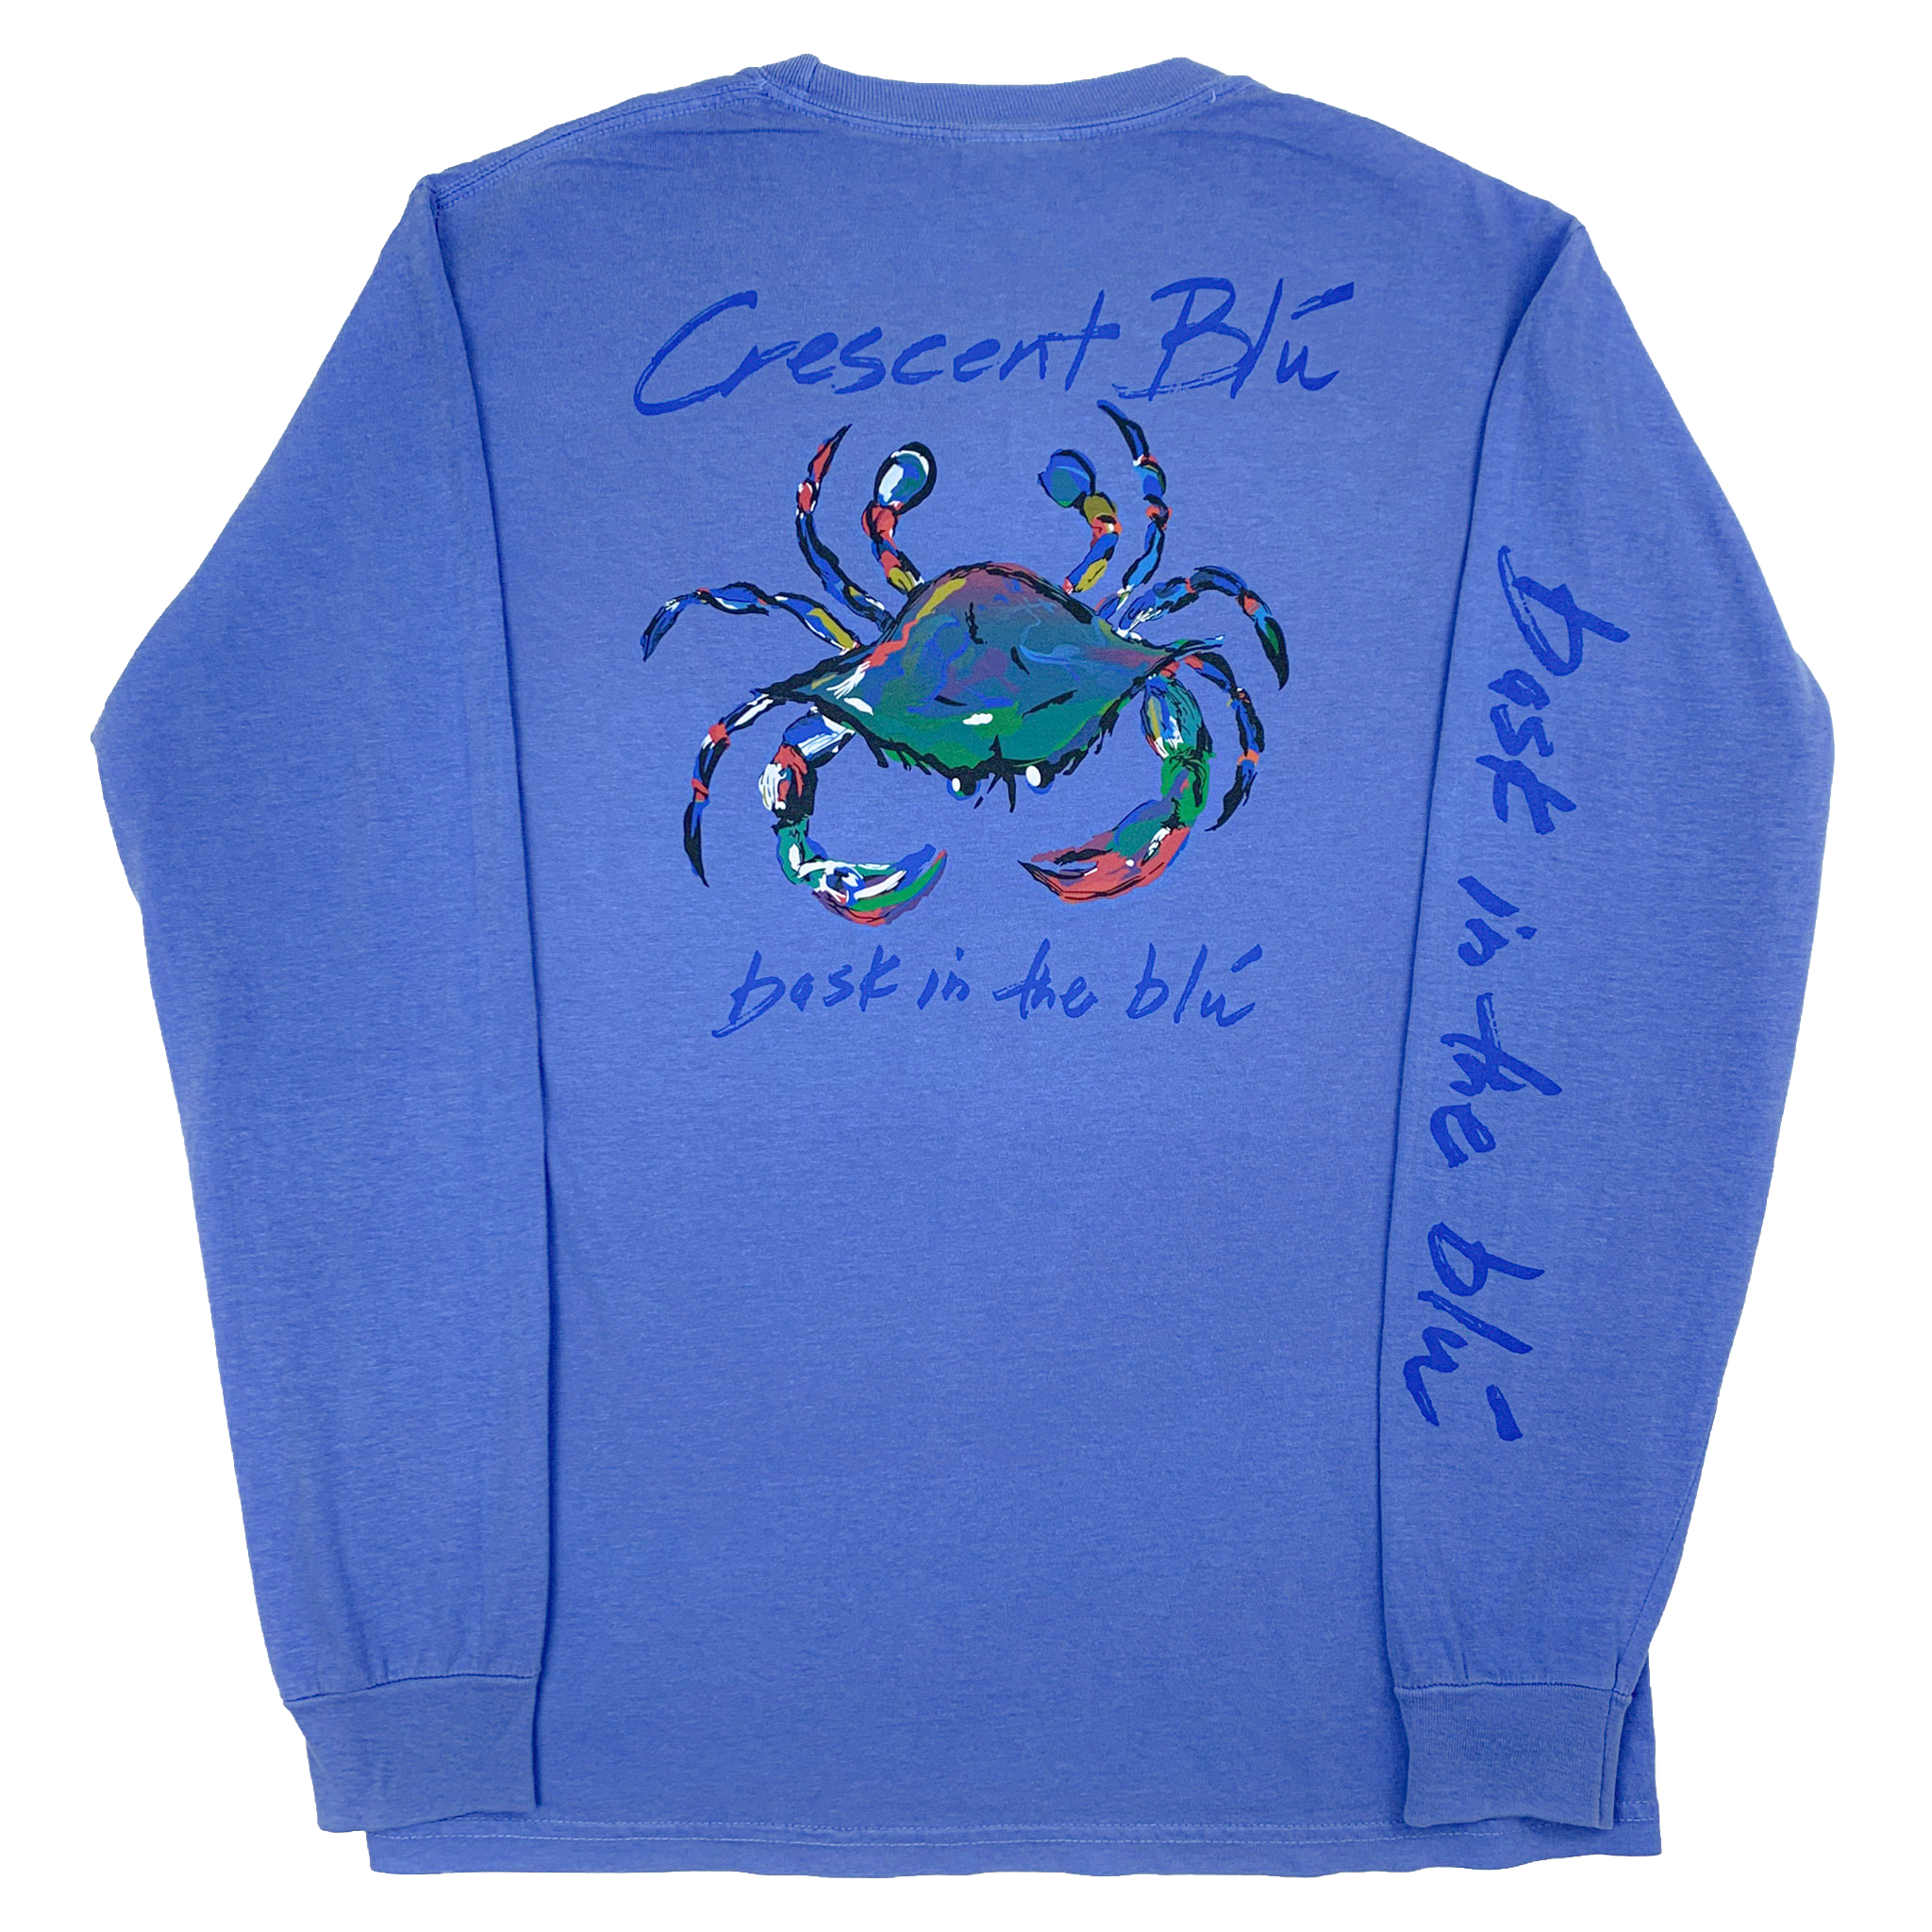 Back view of an adult long sleeve Flo Blue tee with large Crescent Blu multi-colored crab logo on back of shirt and Bask in the Blu written on the right sleeve. 